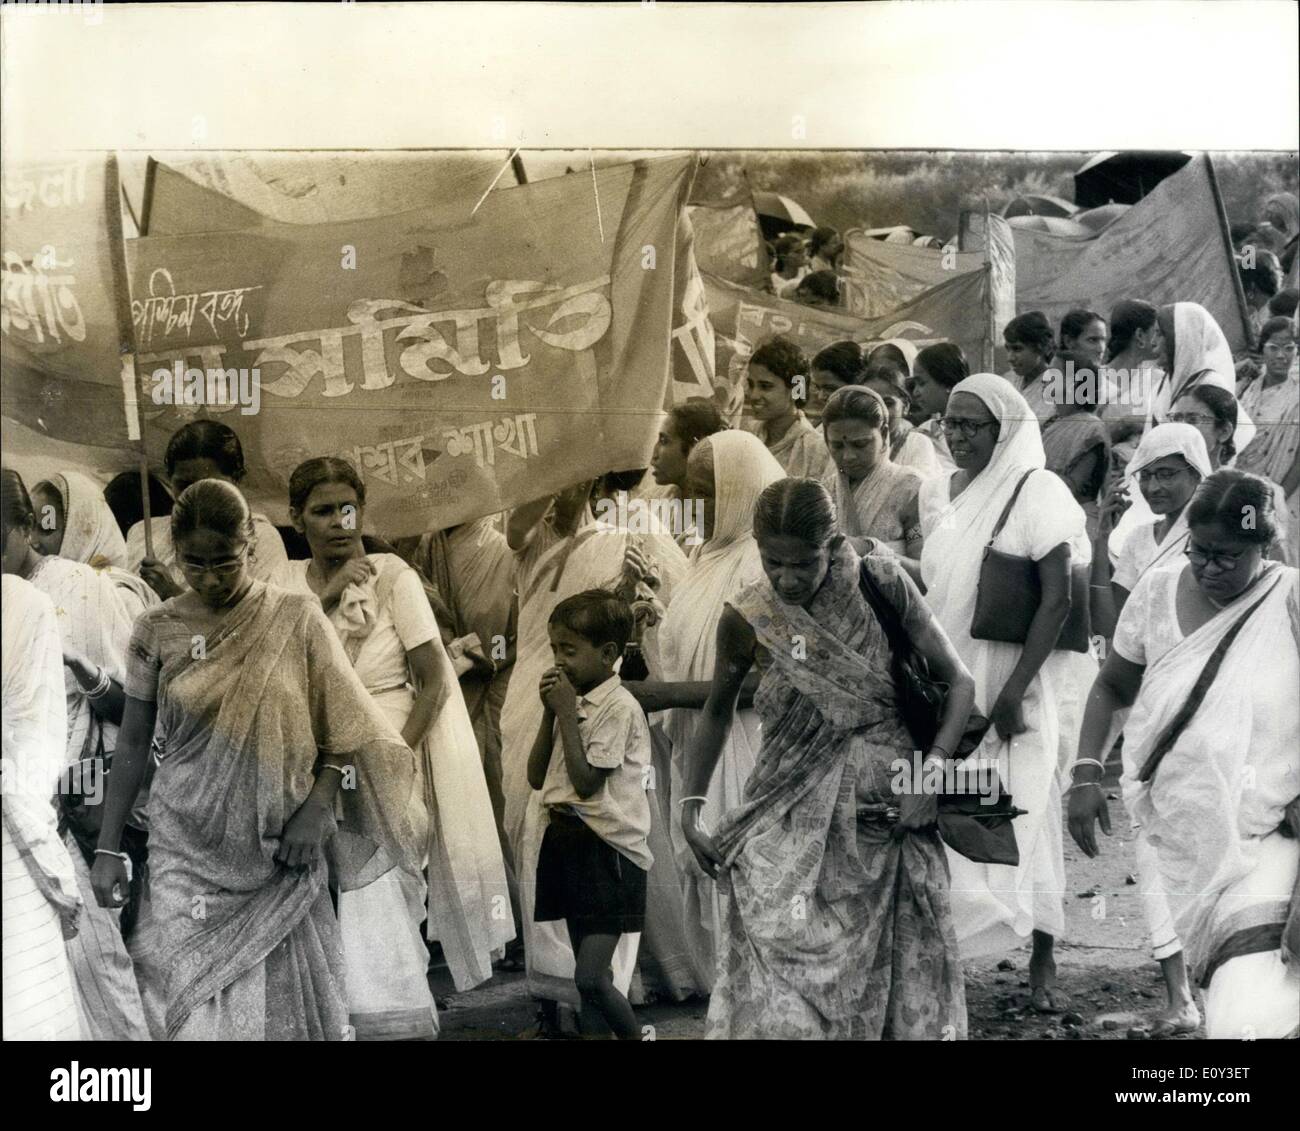 Jul. 07, 1968 - Women Demand Release of Husbands. Wives of political detainees in Calcutta, supported by several women's organisations in the city, demonstrated last week demanding immediate release of their husbands from jail. They said detention of people in jail without letting them face trial was violation of democratic principles. In many families the only earning member has been detained as a political prisoner. As a result many wives and their children have reached semi-starvation stage Stock Photo